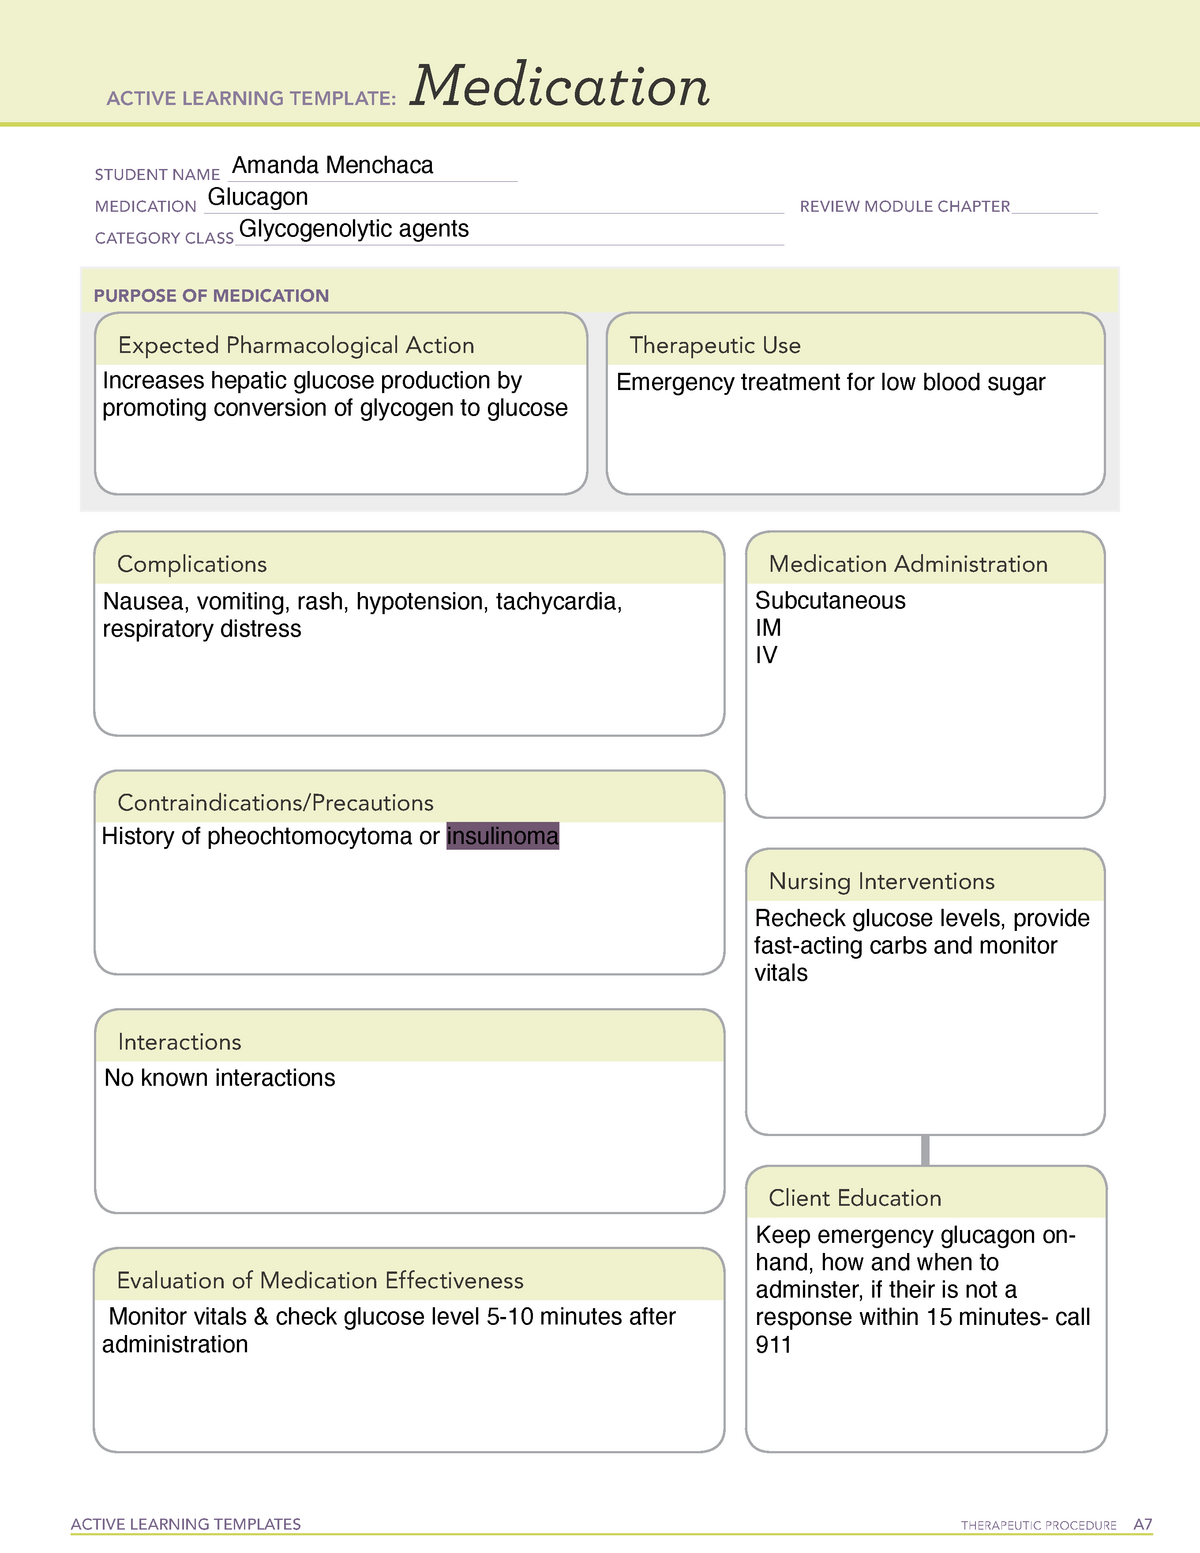 GlucagonMED ATI medication card template ACTIVE LEARNING TEMPLATES